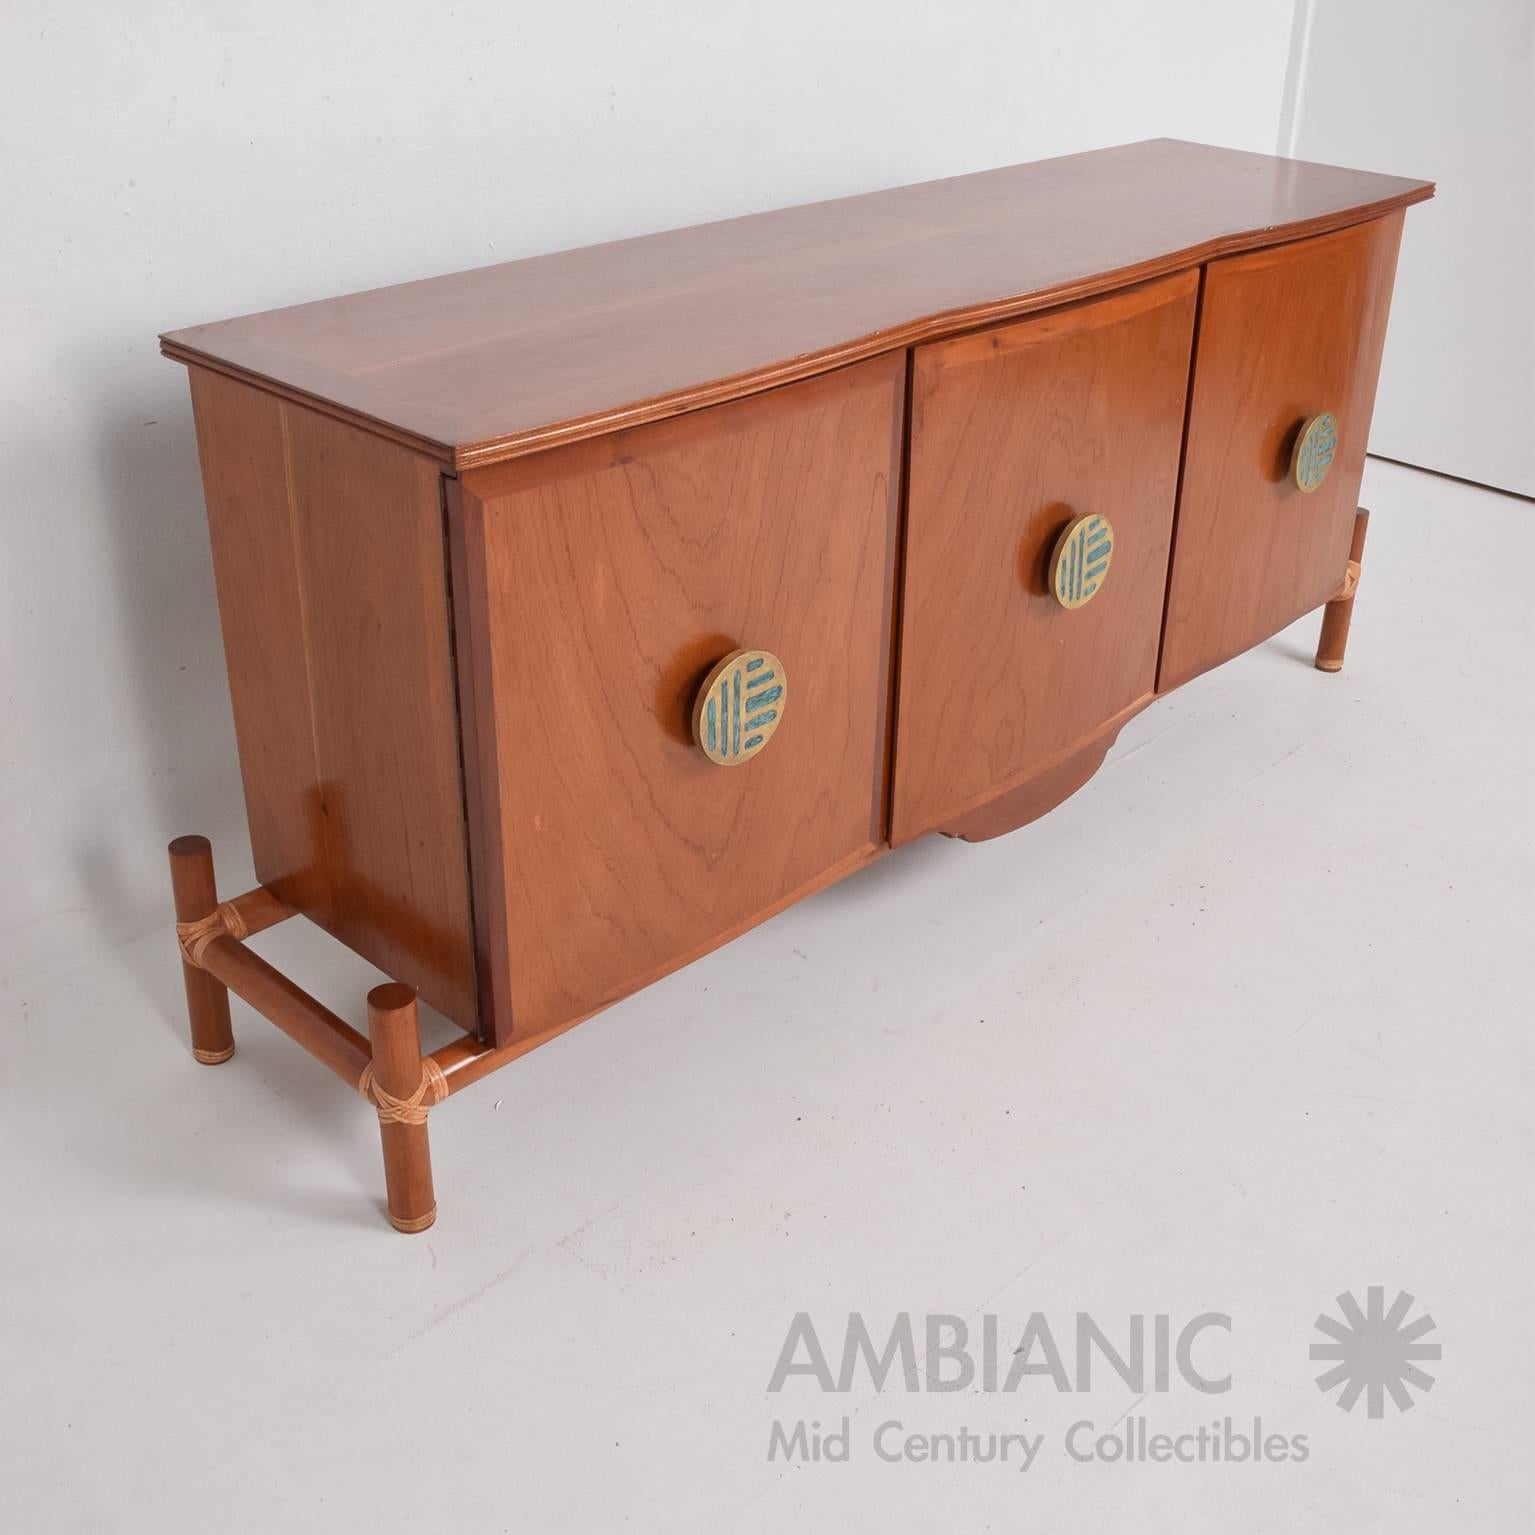 Mid-Century Modern Mexican Modernist Credenza with Pepe Mendoza Pulls, Frank Kyle